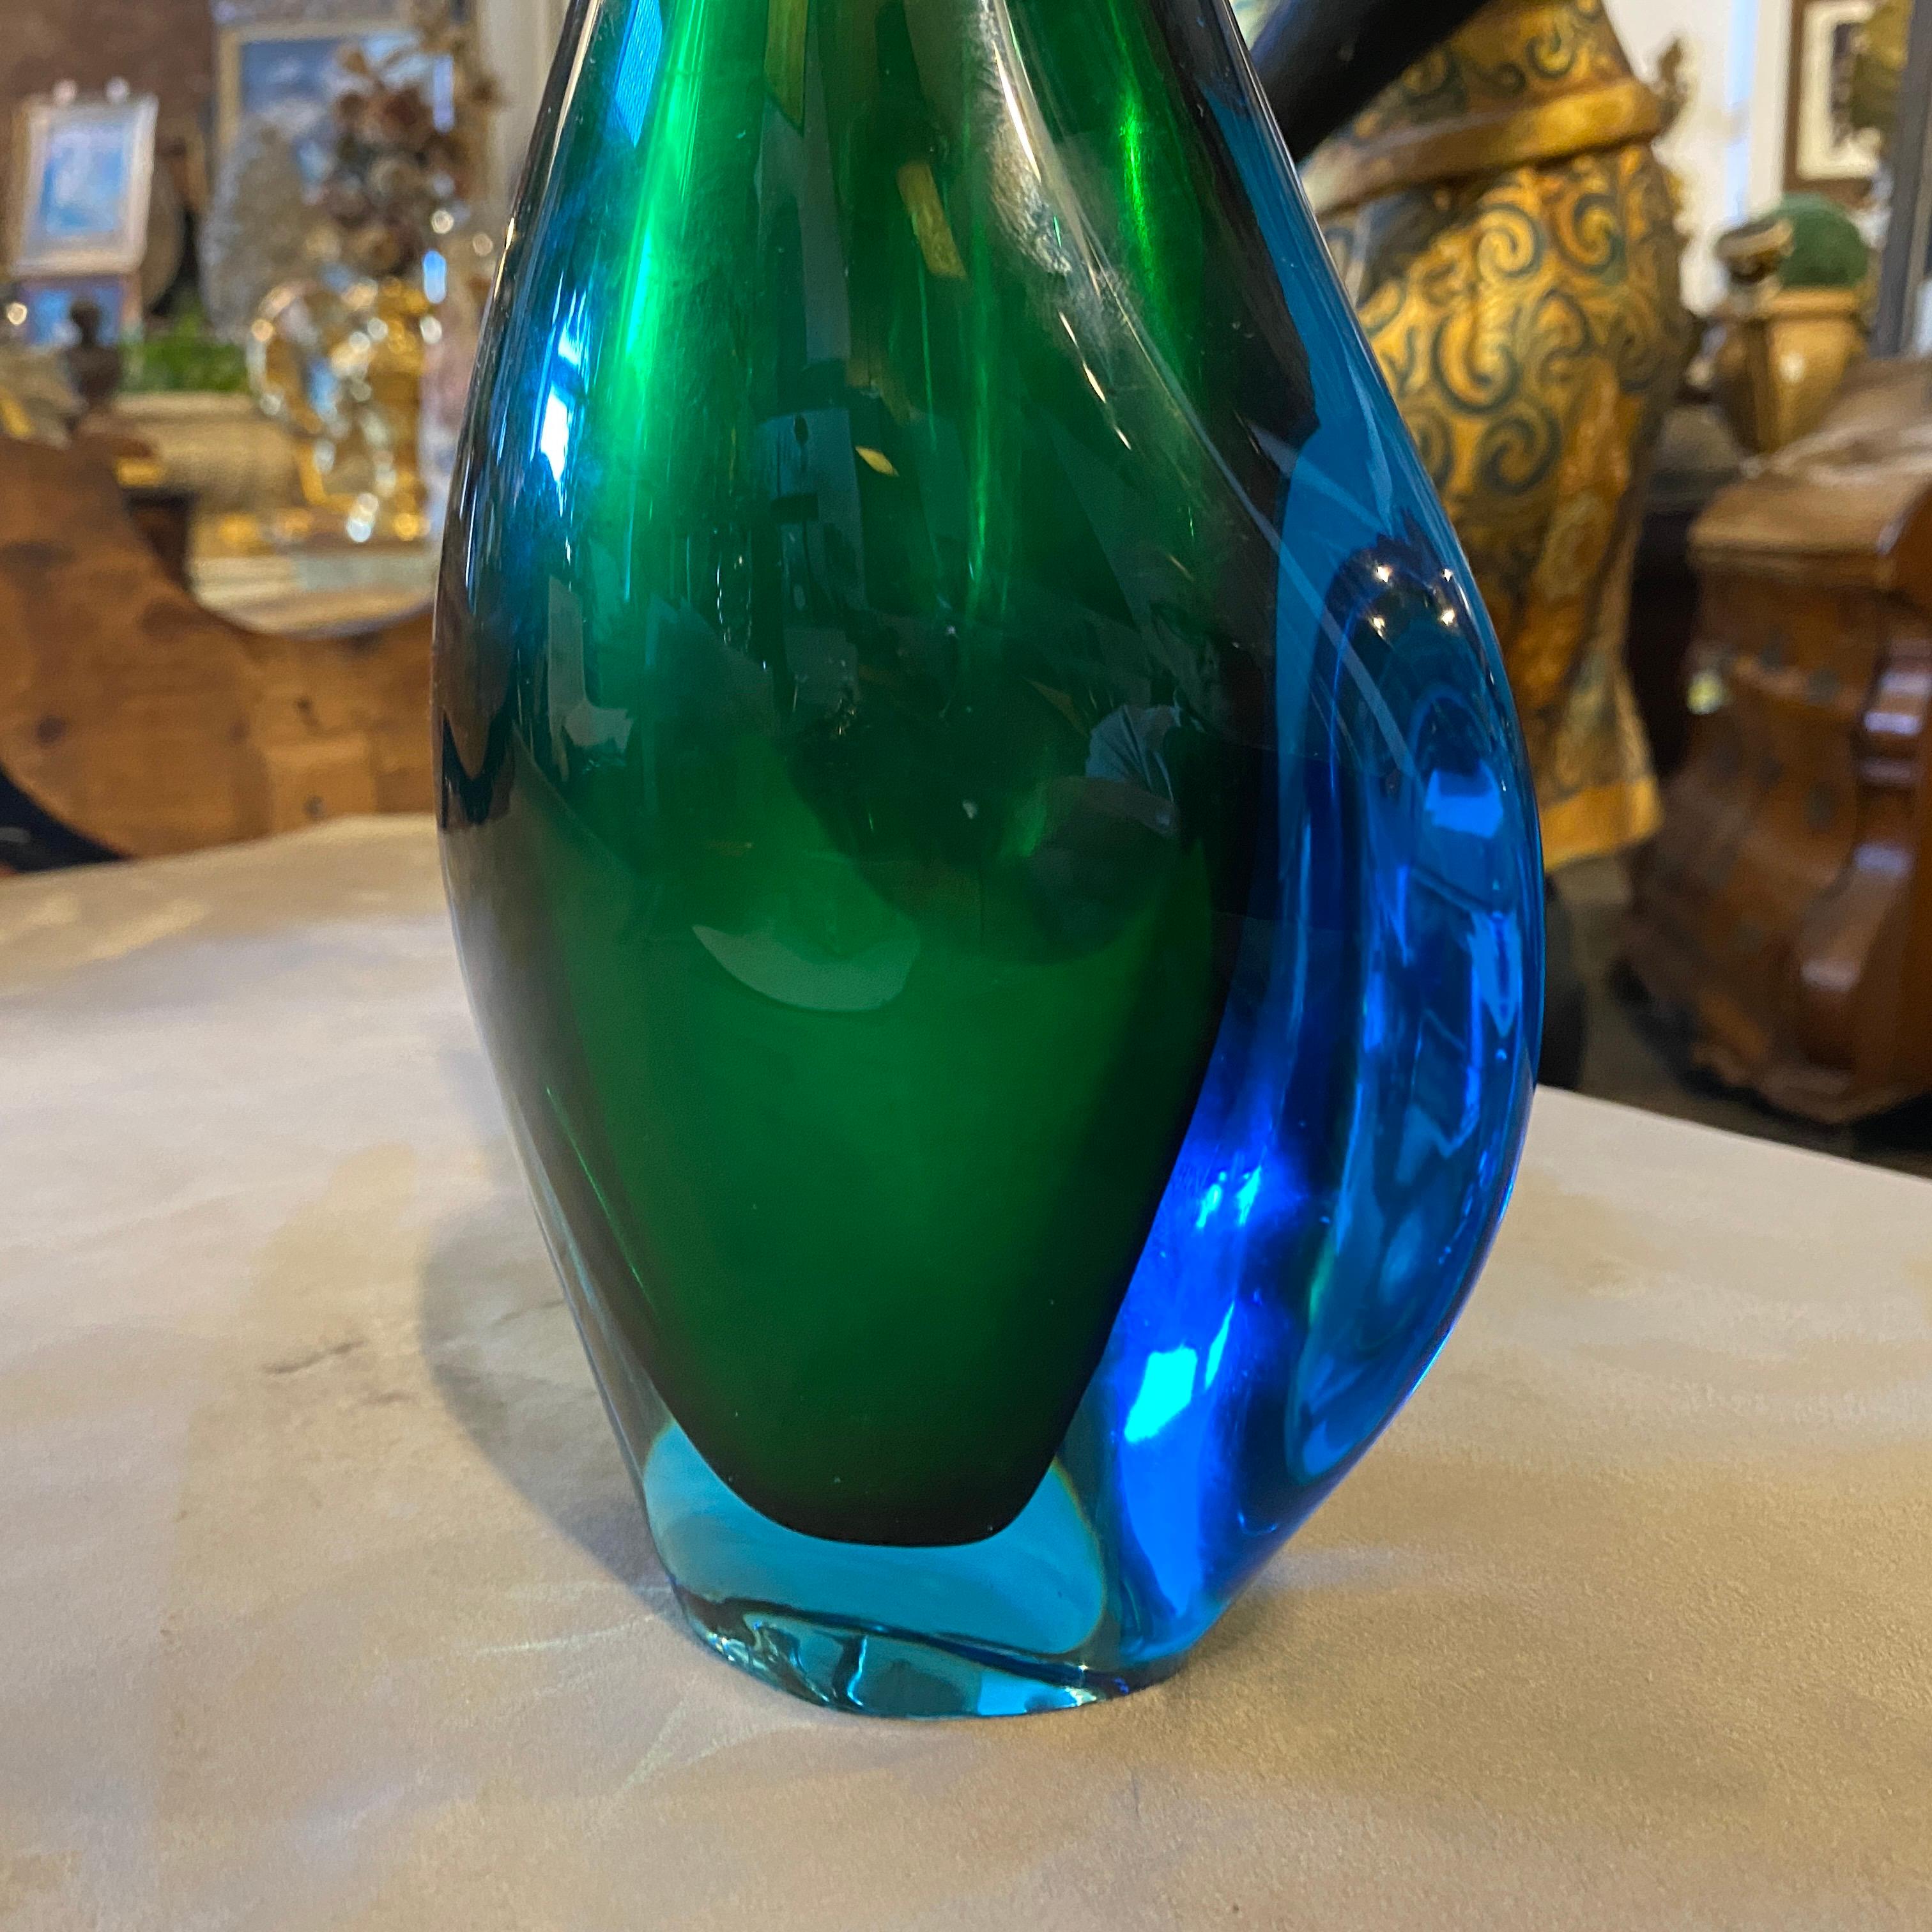 Hand-Crafted 1970s Modernist Blue and Green Heavy Murano Glass Vase by Fabio Poli for Seguso